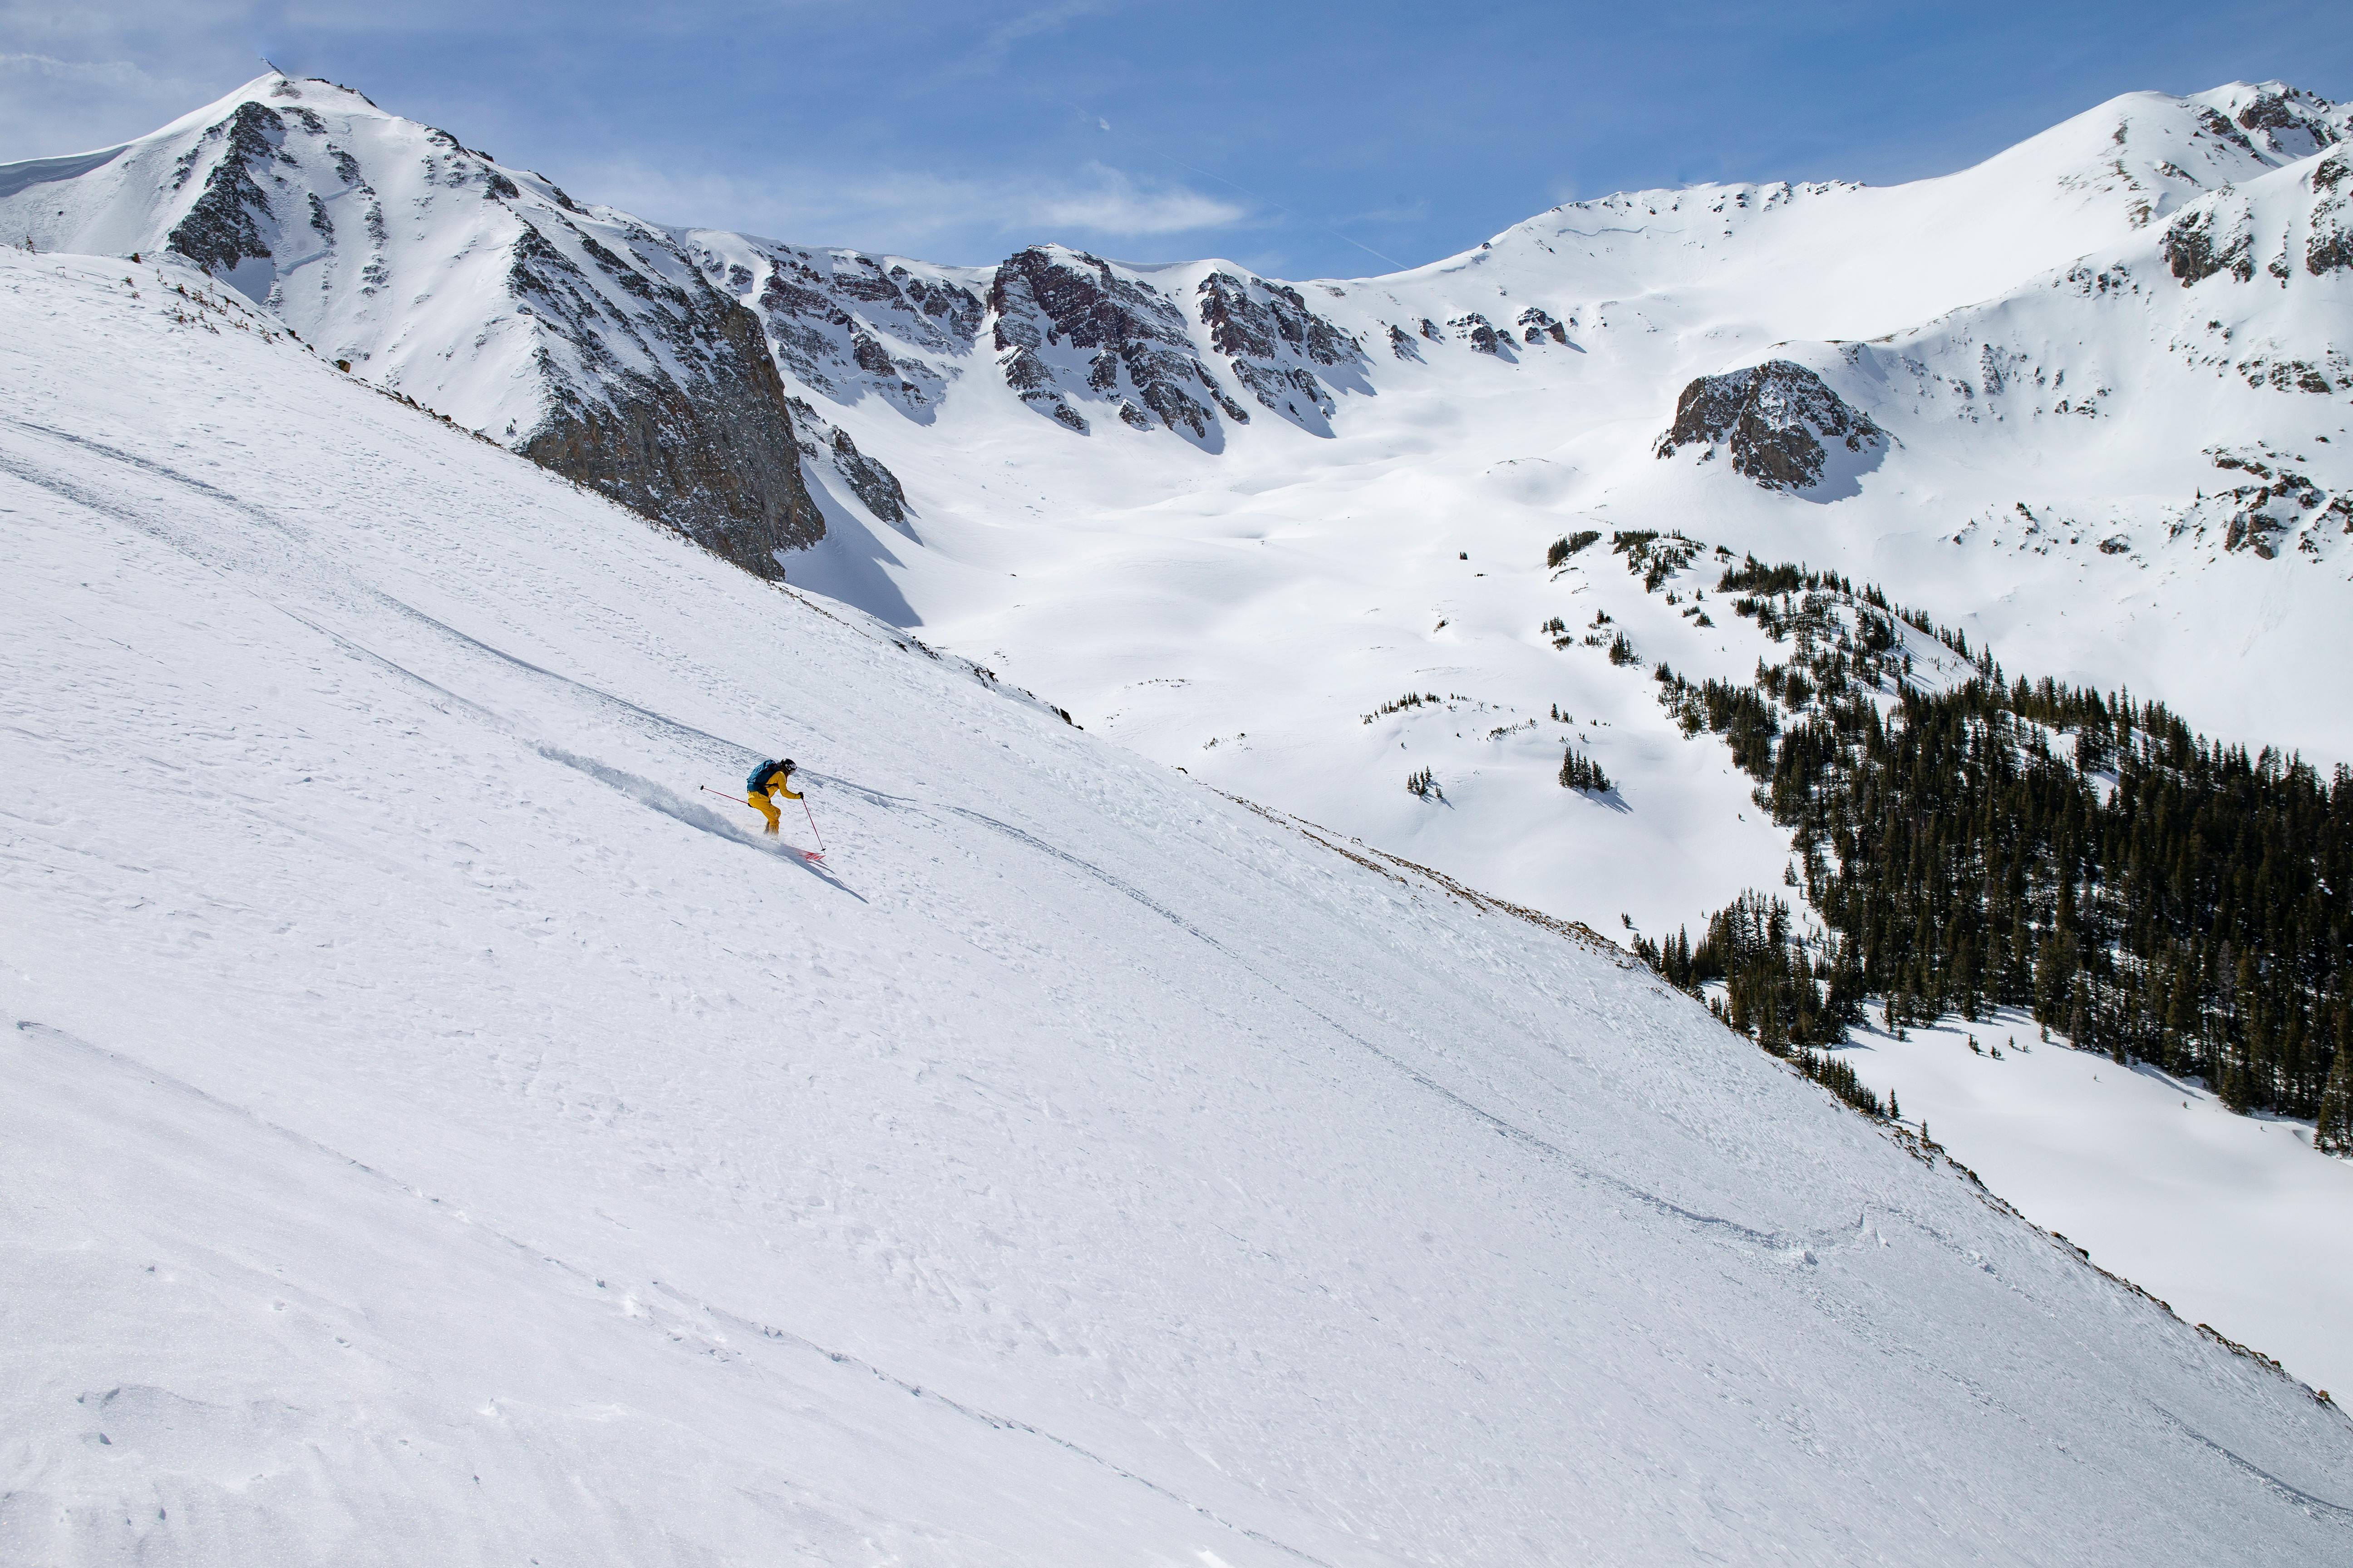 A solo skier bombing down a steep backcountry slope.